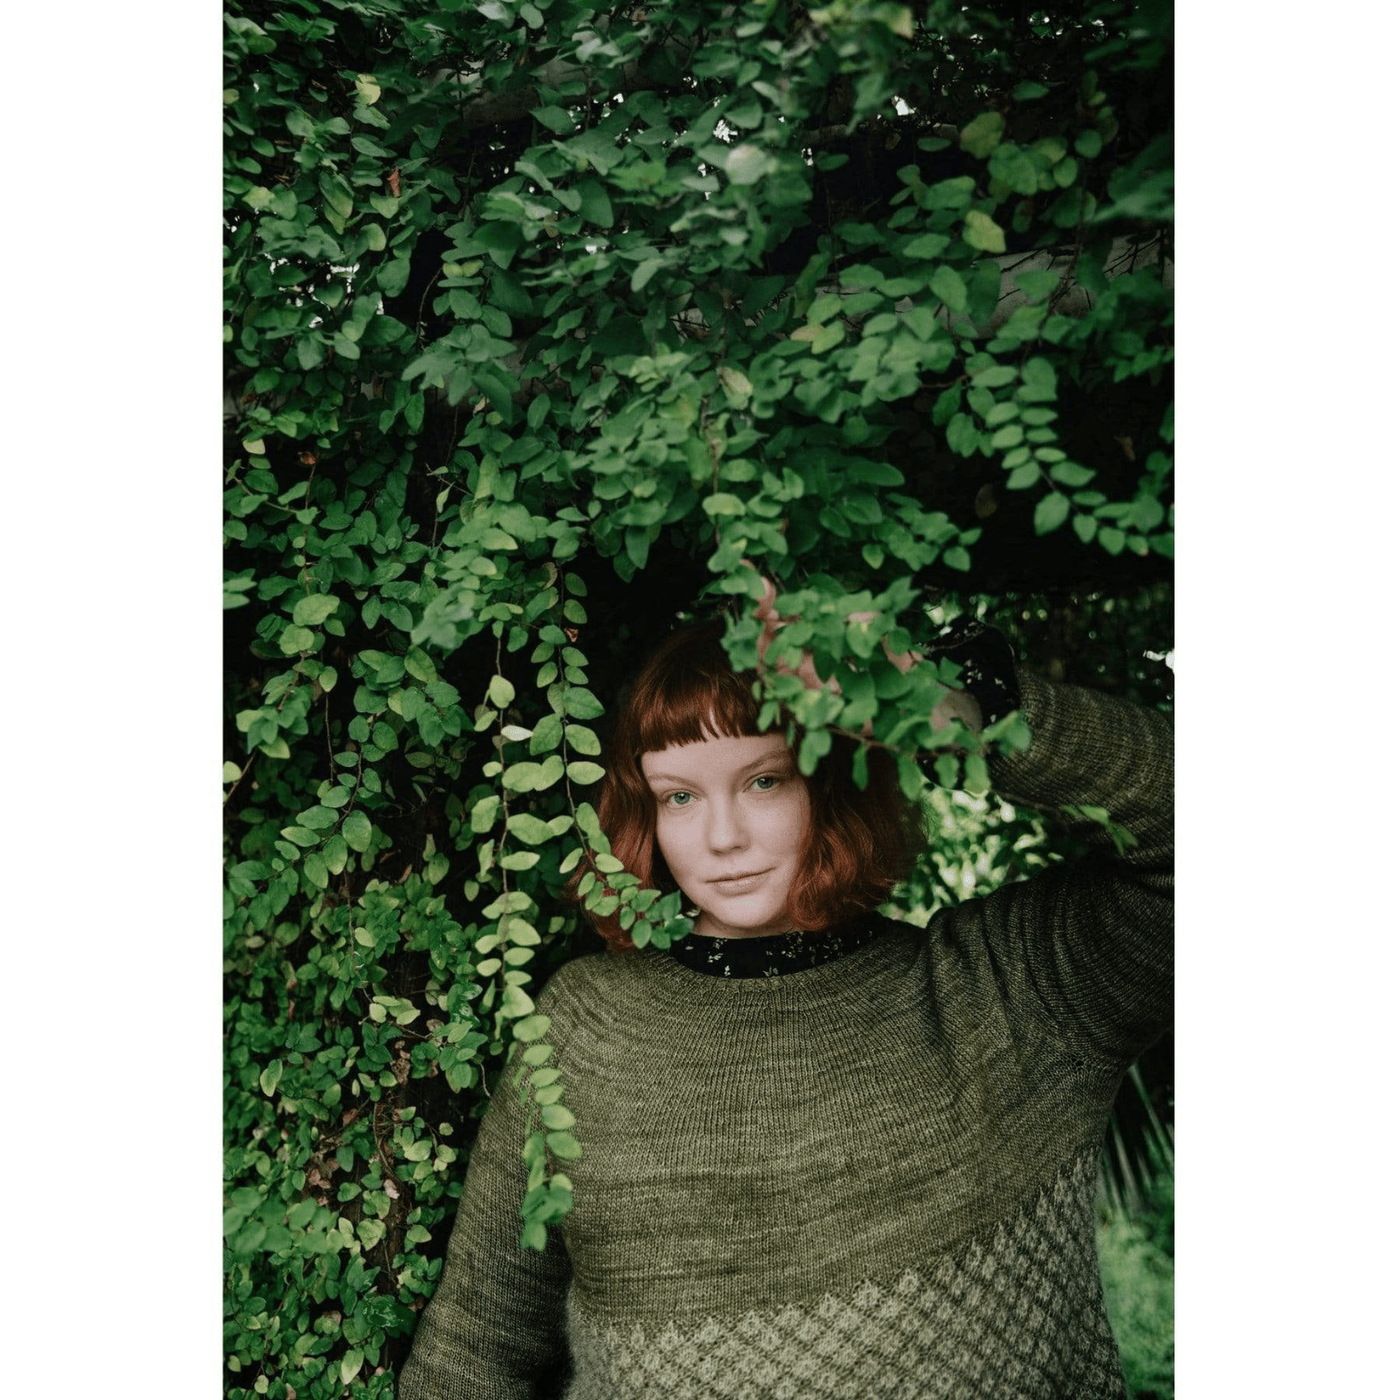 The Woolly Thistle Products Laine Magazine, Issue 11 Summer 2021 Nordic Knit Life woman wearing green knitted sweater